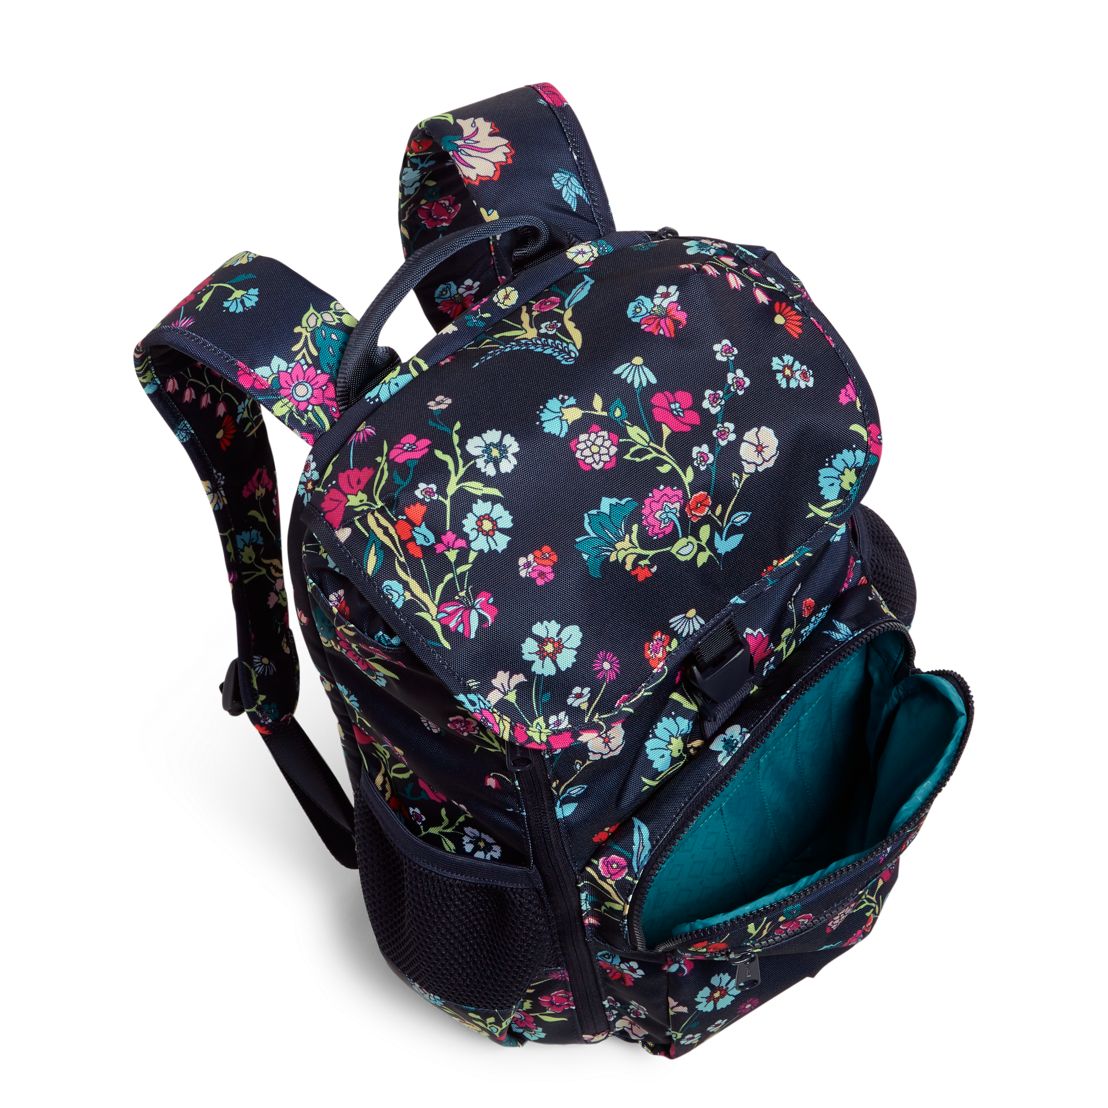 Vera Bradley ReActive Daytripper Backpack in Itsy Ditsy Floral